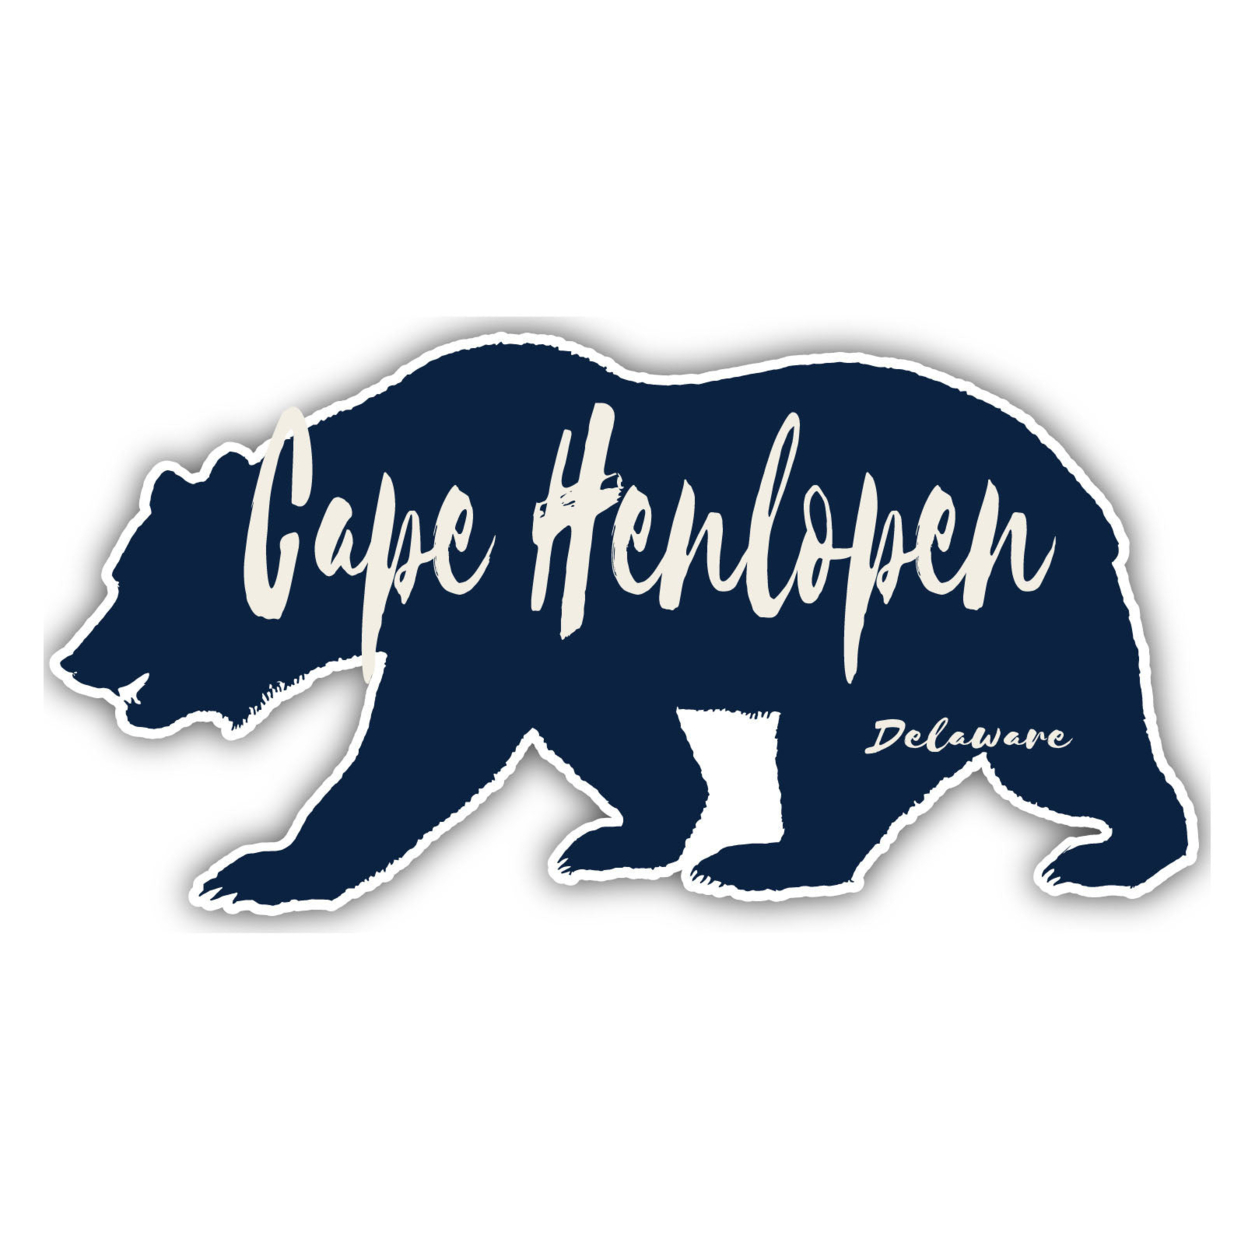 Cape Henlopen Delaware Souvenir Decorative Stickers (Choose Theme And Size) - 4-Pack, 10-Inch, Camp Life